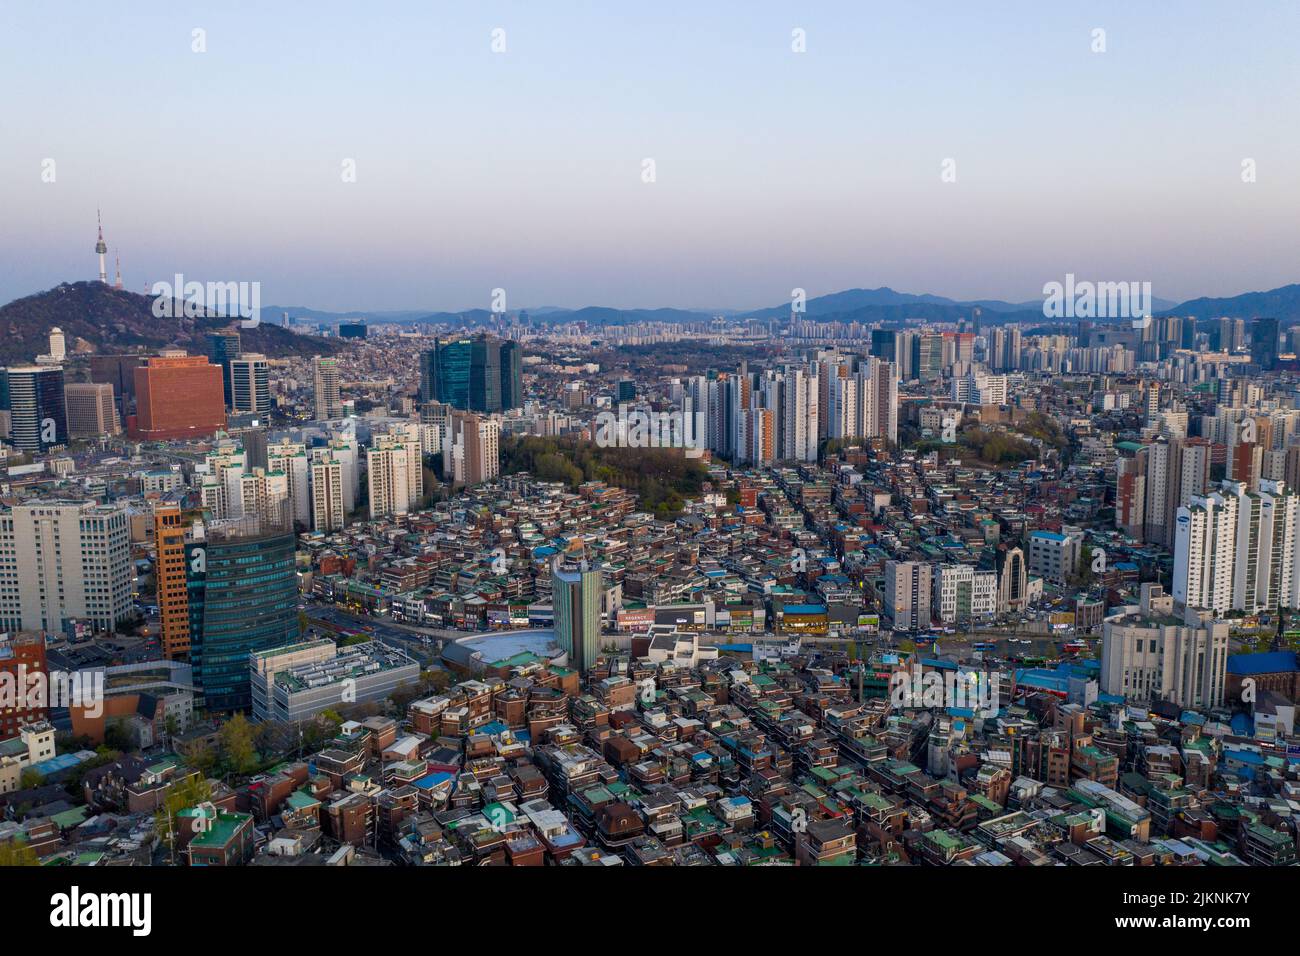 An aerial cityscape of Seoul surrounded by buildings in background of mountains Stock Photo